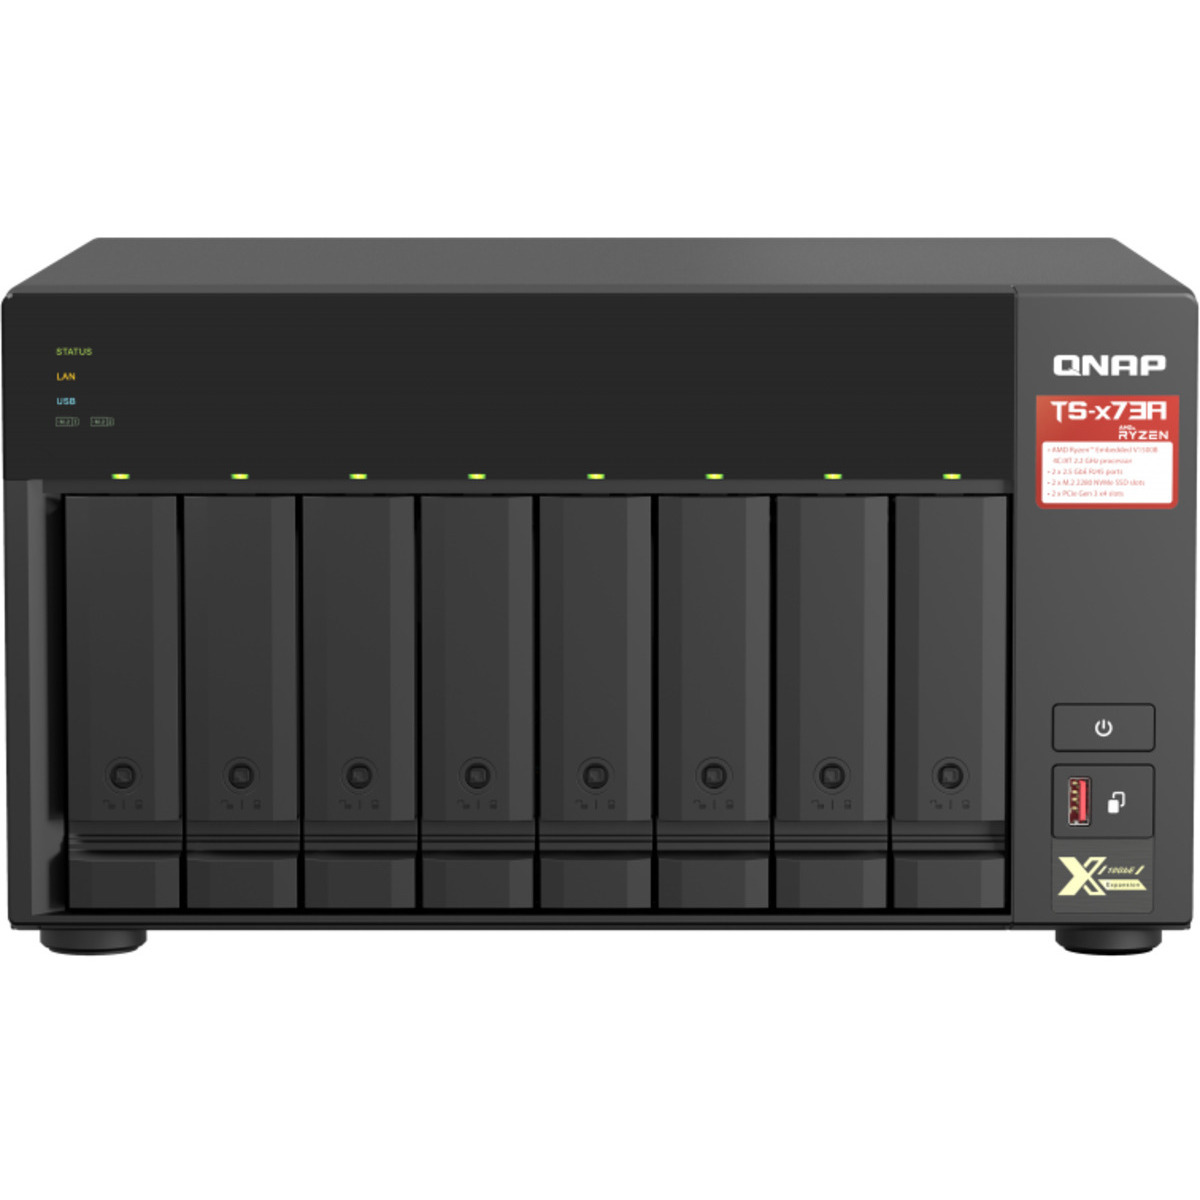 QNAP TS-873A 80tb 8-Bay Desktop Multimedia / Power User / Business NAS - Network Attached Storage Device 4x20tb Seagate IronWolf Pro ST20000NT001 3.5 7200rpm SATA 6Gb/s HDD NAS Class Drives Installed - Burn-In Tested TS-873A